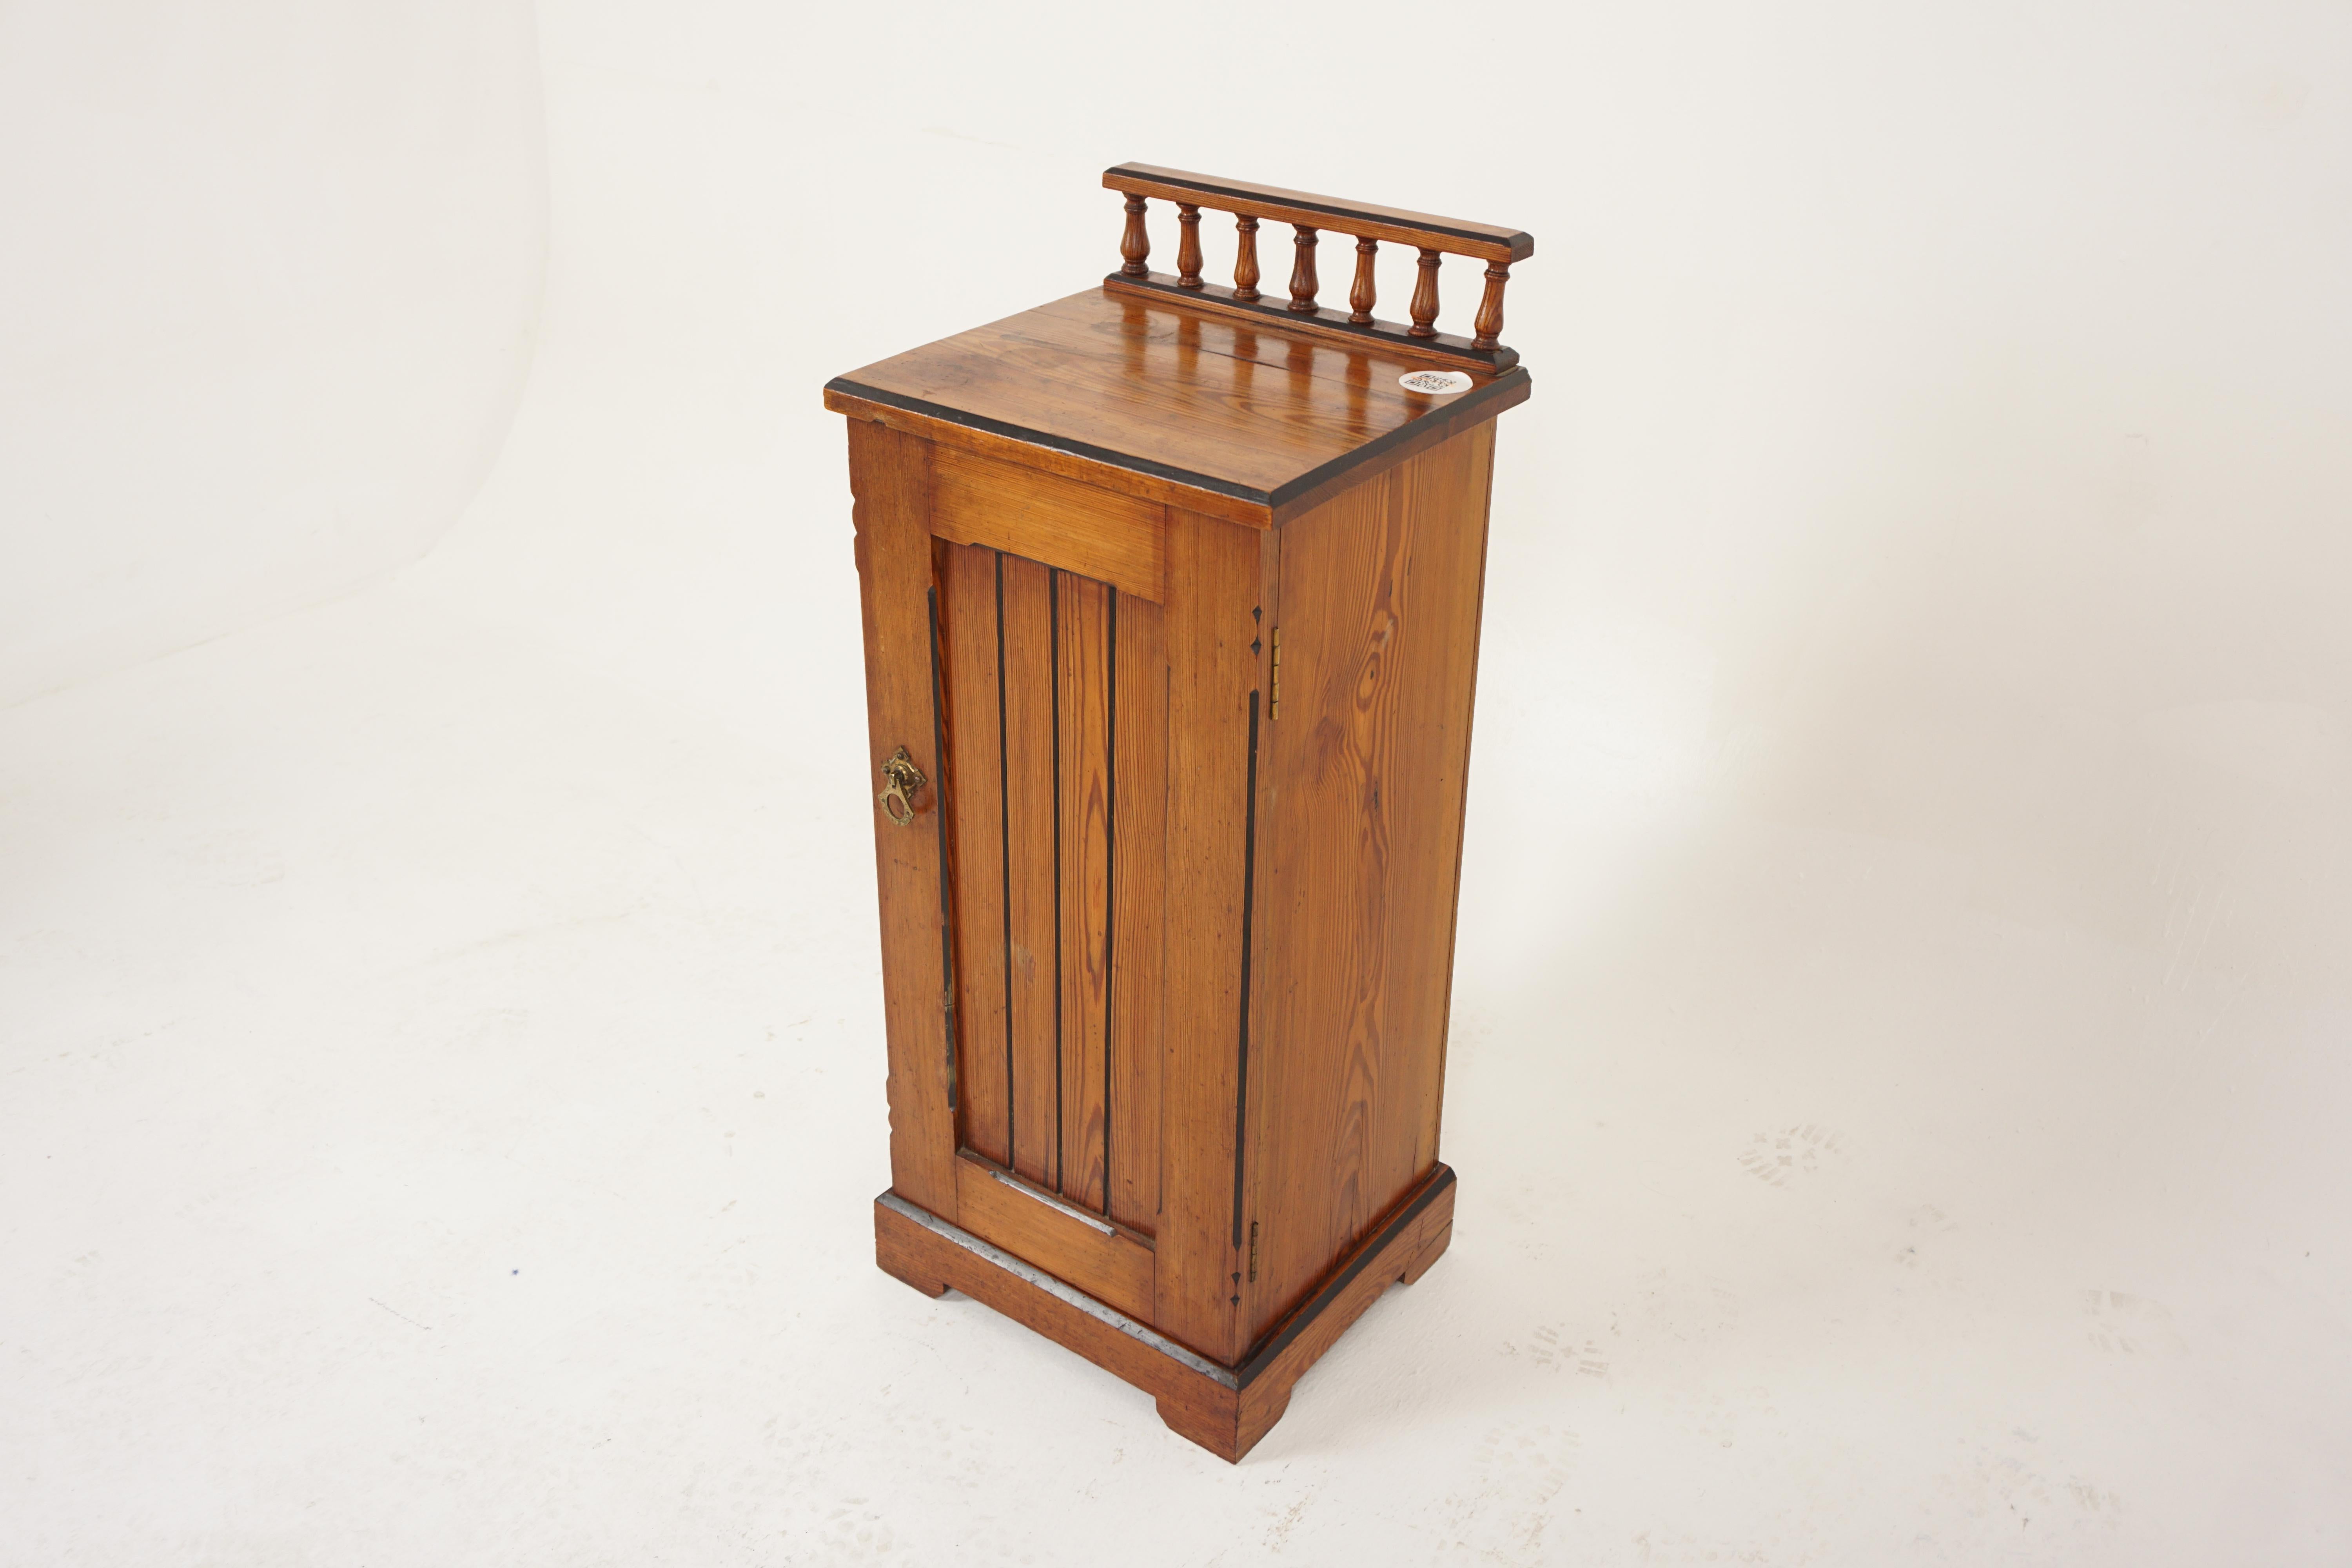 Victorian Pitch Pine nightstand, bedside cabinet, lamp table, Scotland 1880, H340

Scotland 1880
Solid Pitch Pine
Original Finish

Small gallery back rectangular moulded top
Single panelled drawer
Original brass hardware
3 Shelf interior
Ending on a